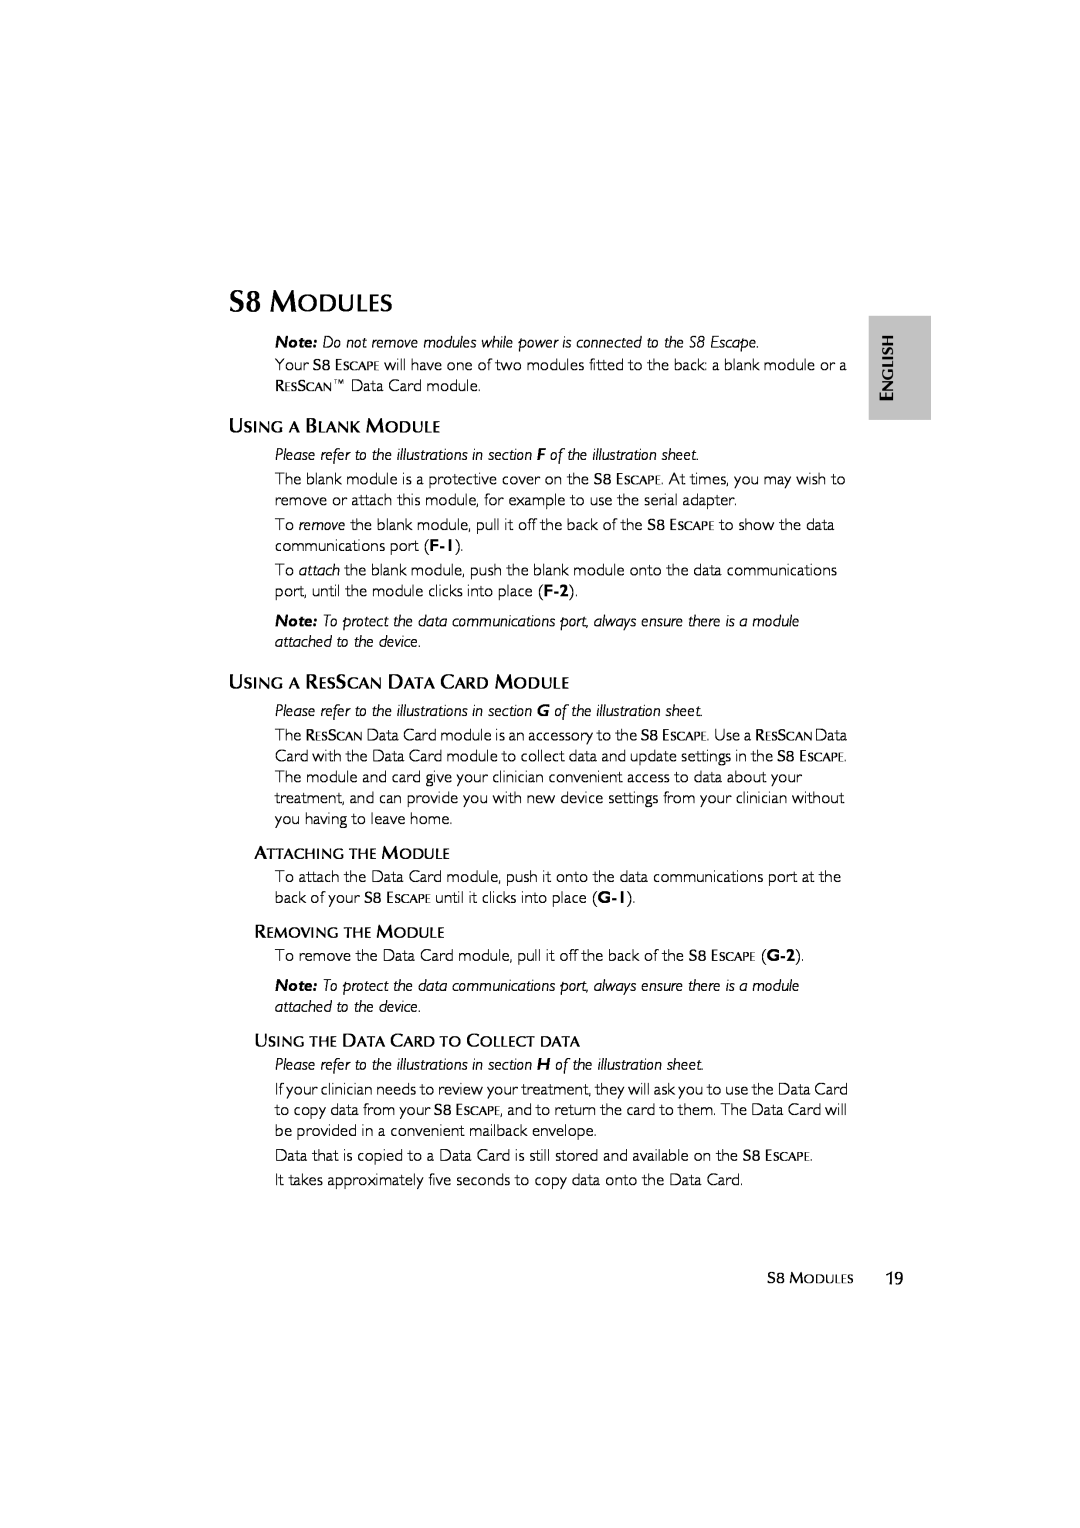 ResMed s8 user manual S8 MODULES 